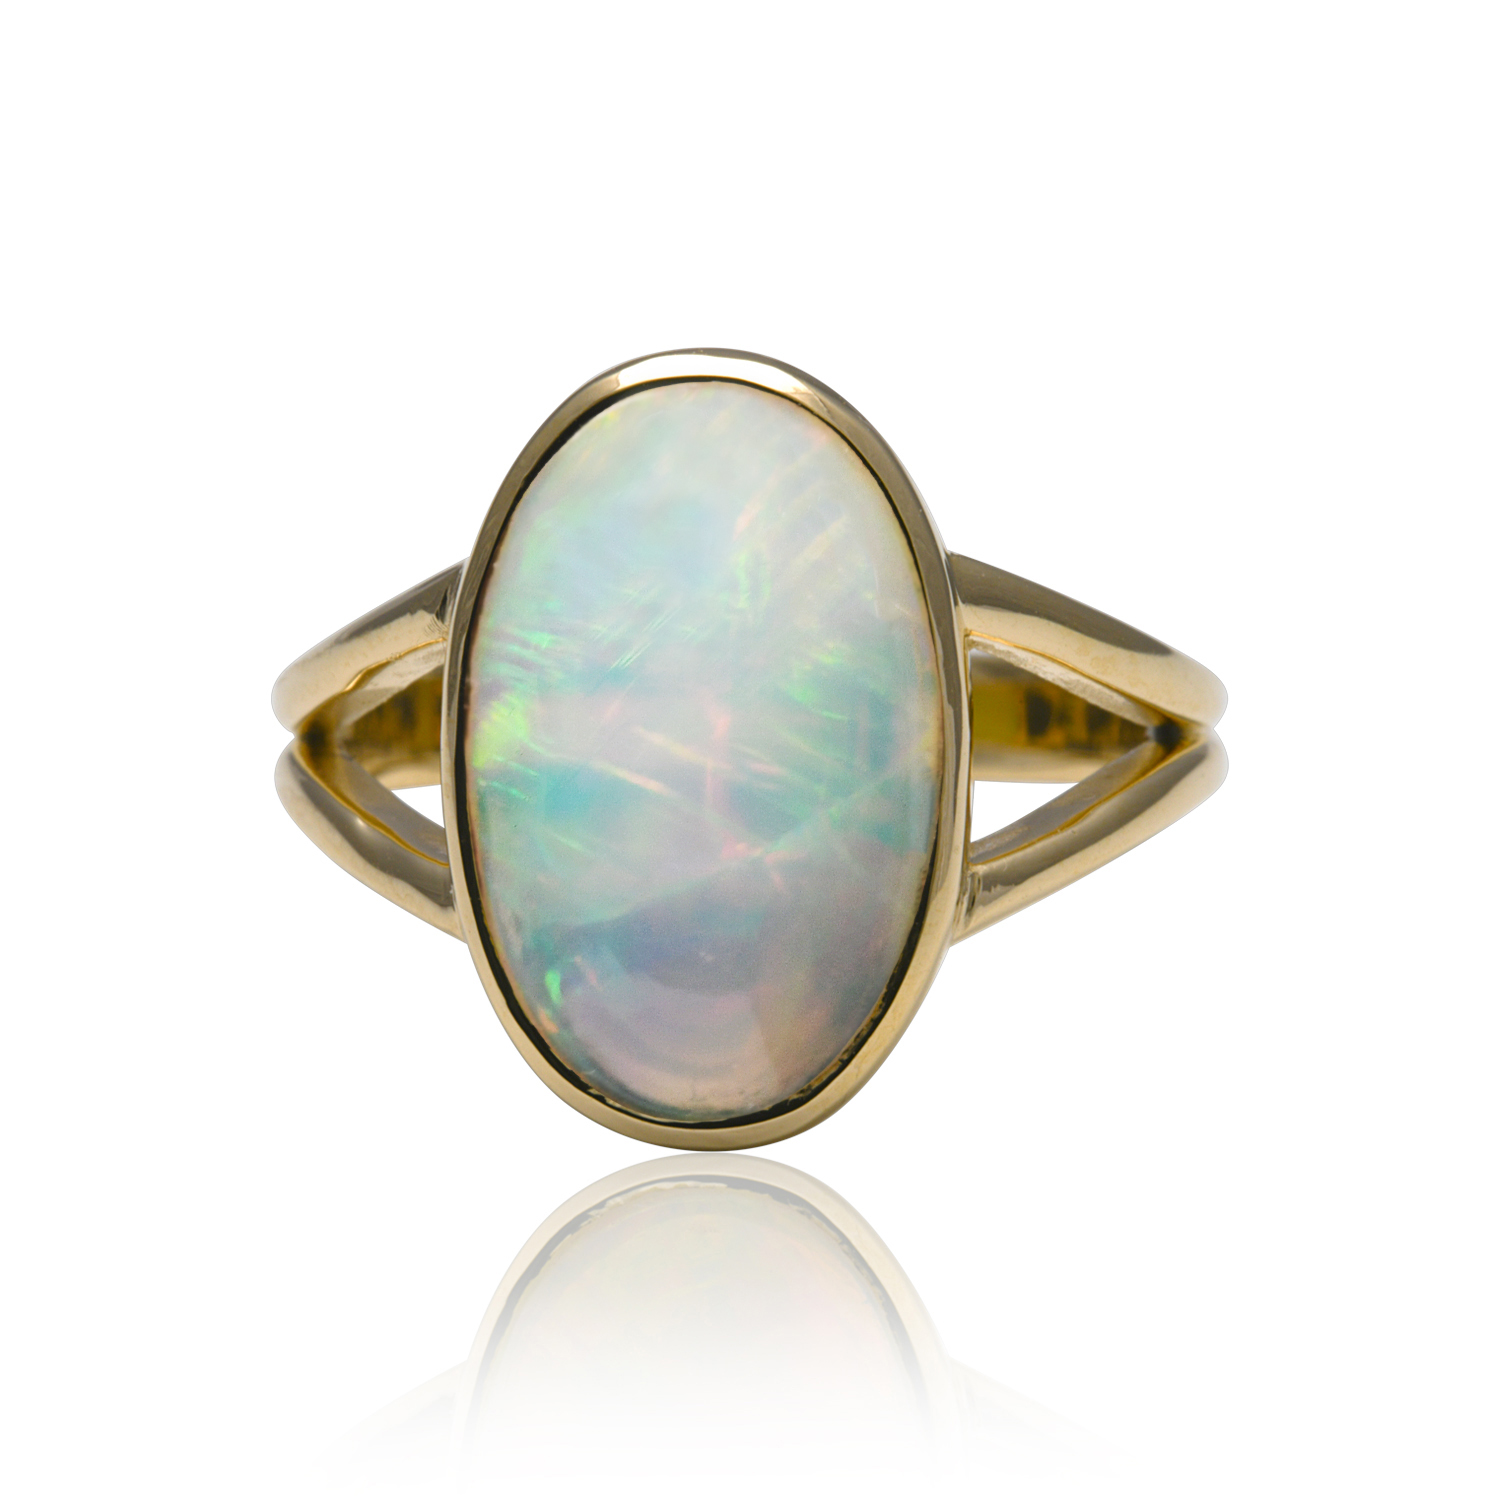 Passage of Time Australian Opal Ring | Crystal Opal Ring | NIXIN